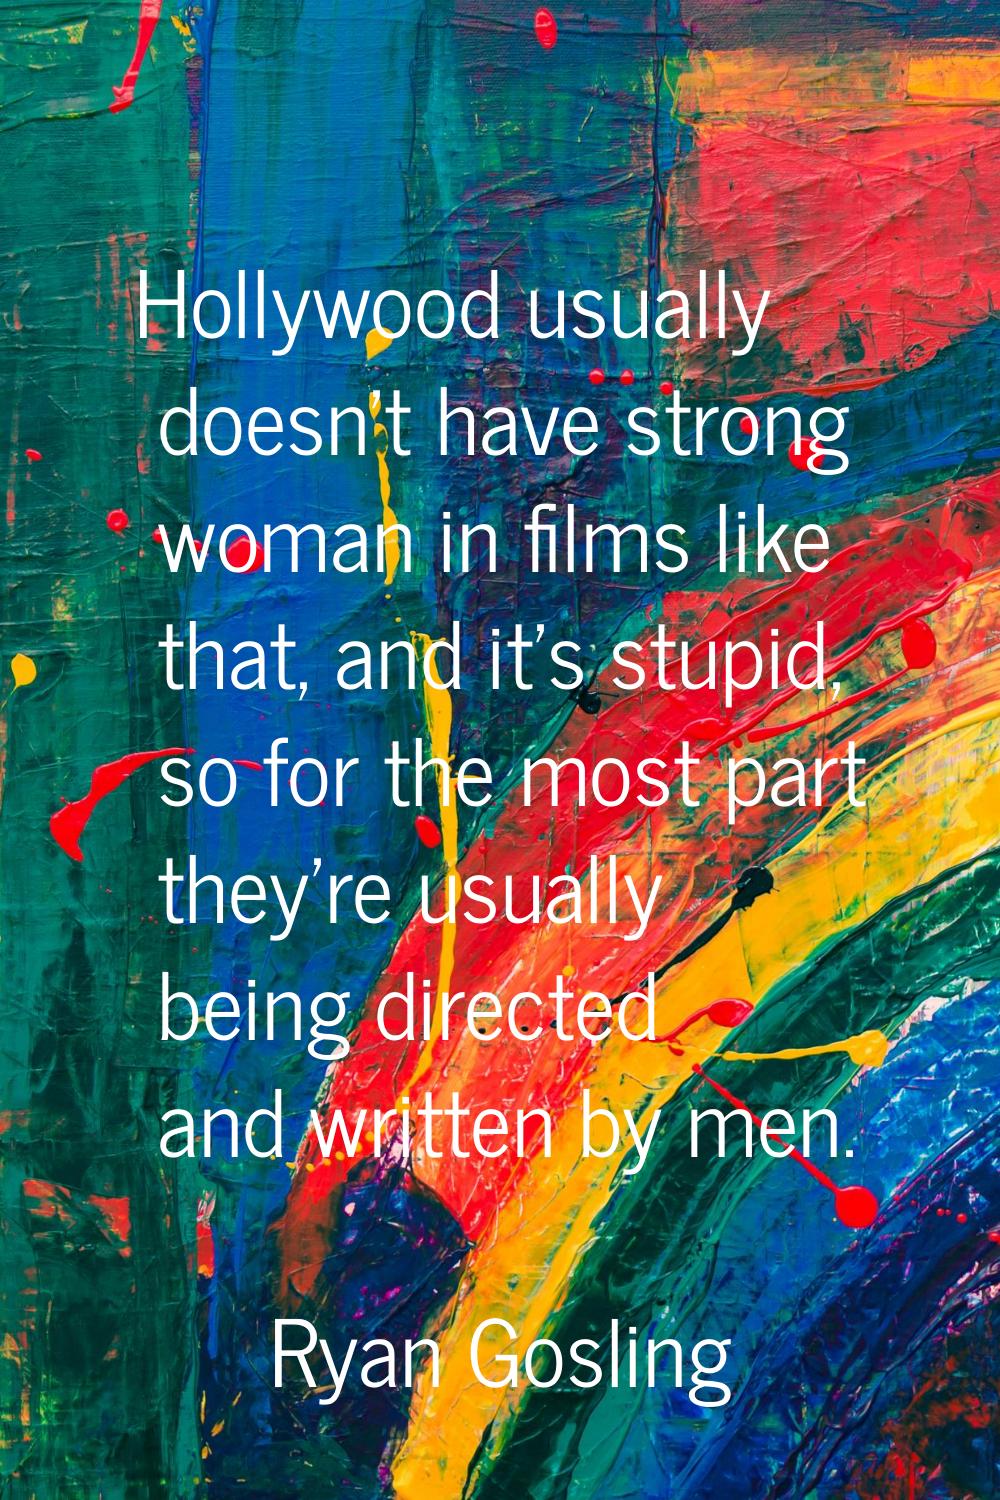 Hollywood usually doesn't have strong woman in films like that, and it's stupid, so for the most pa